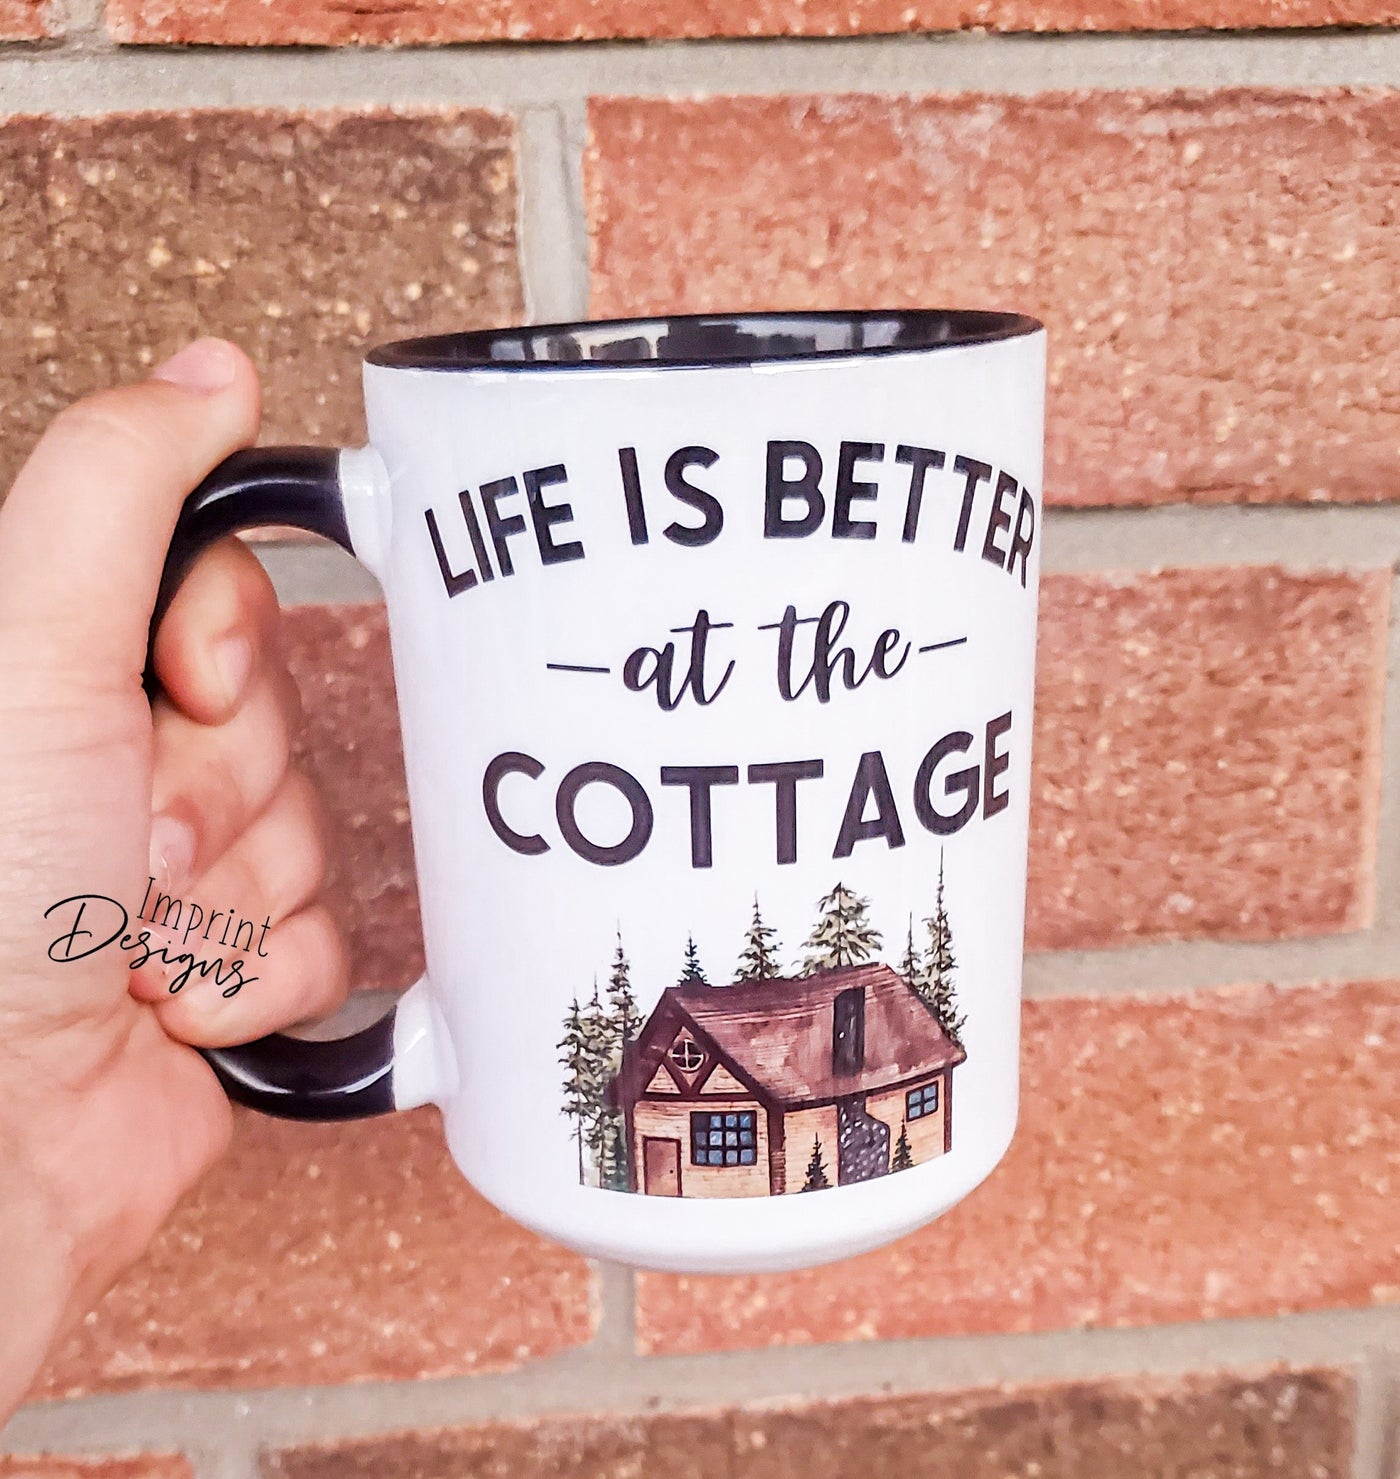 Life is better at the cottage